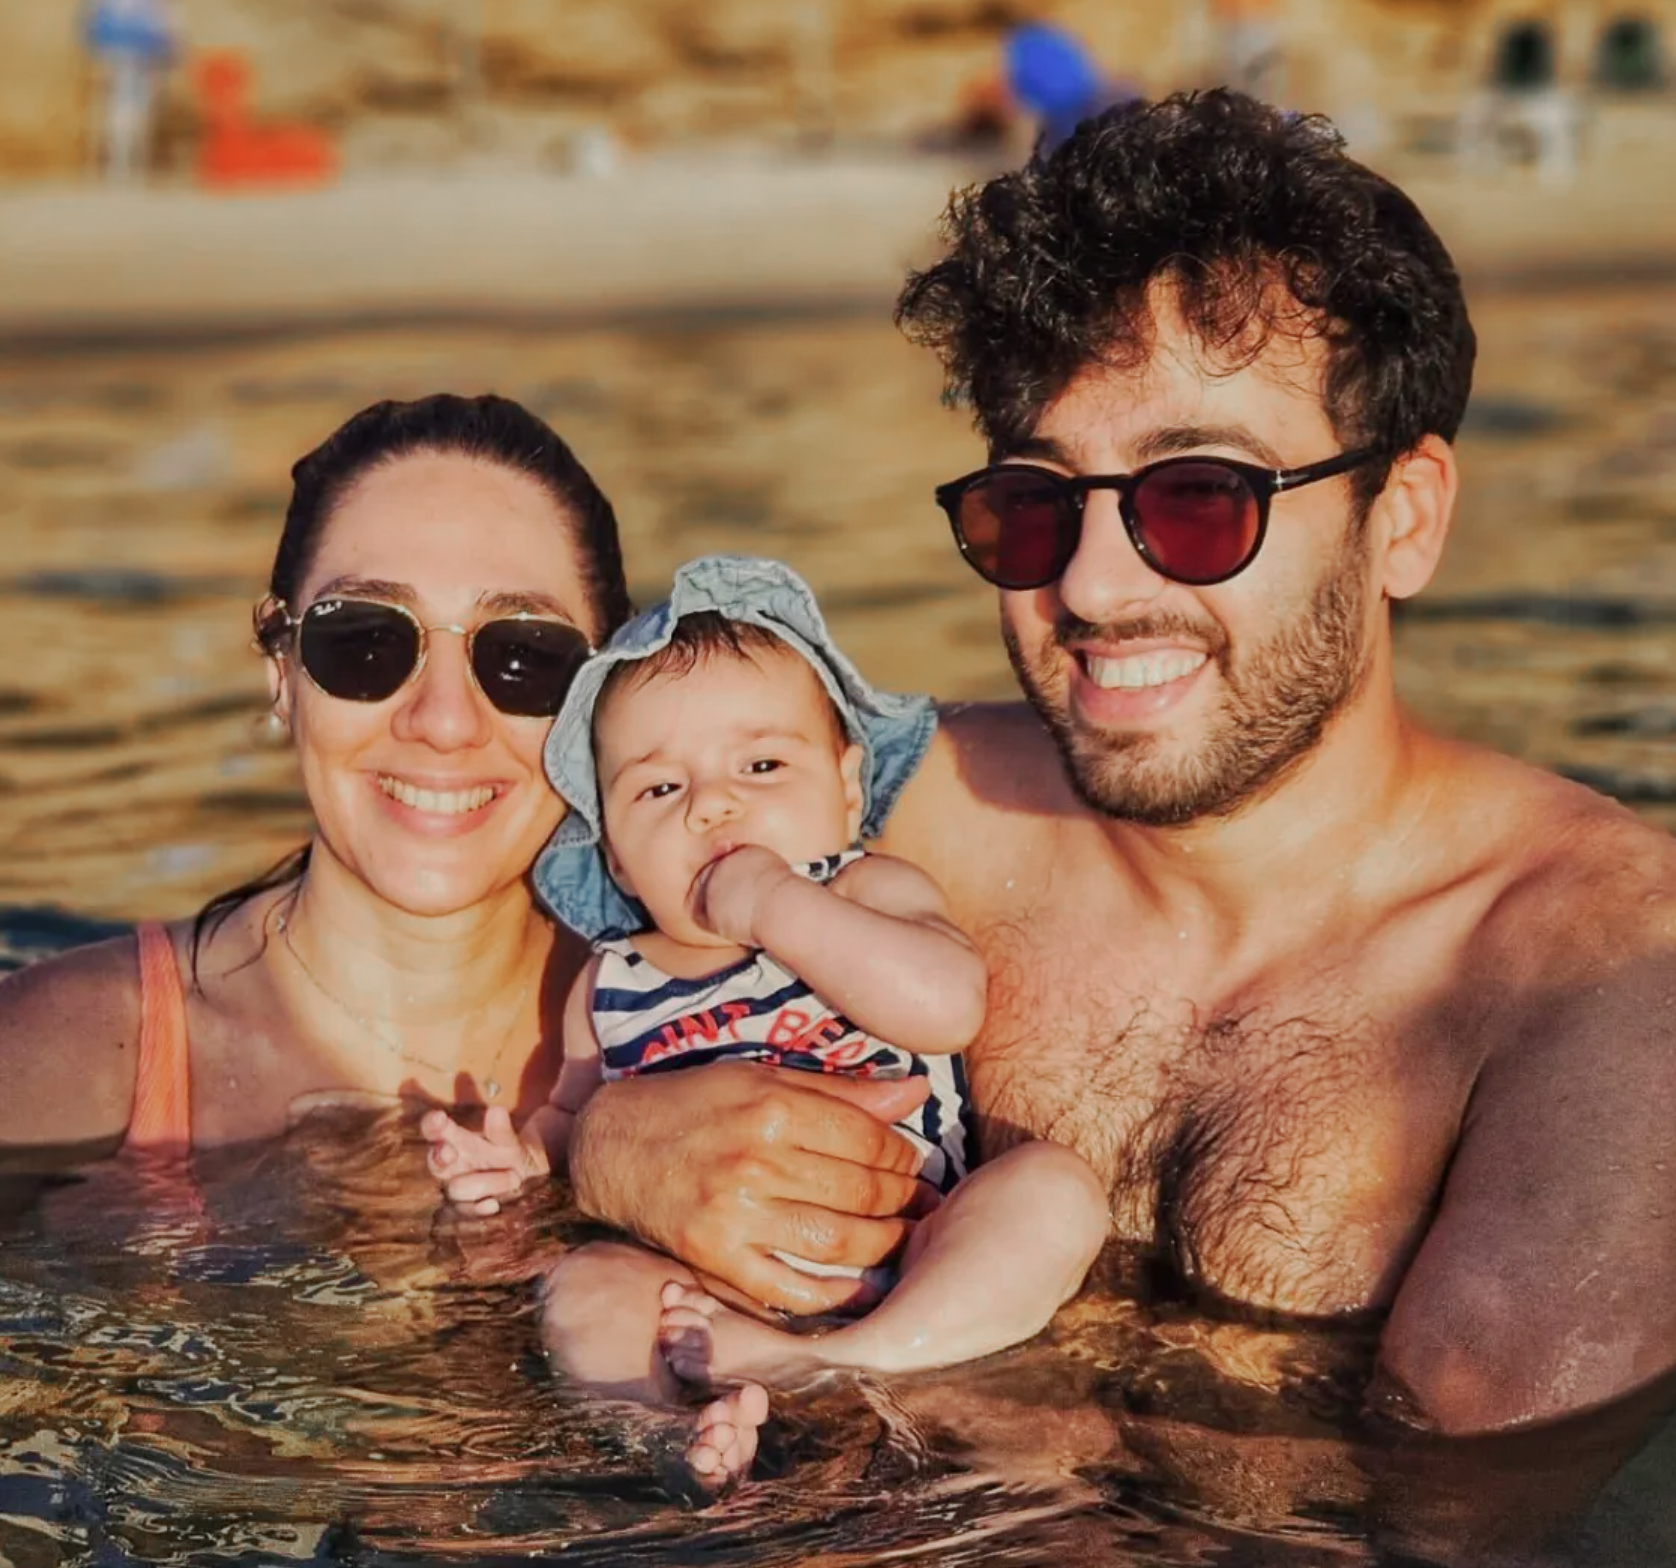 Celine Ben David Nagar pictured with her husband Ido and their baby daughter Ellie.